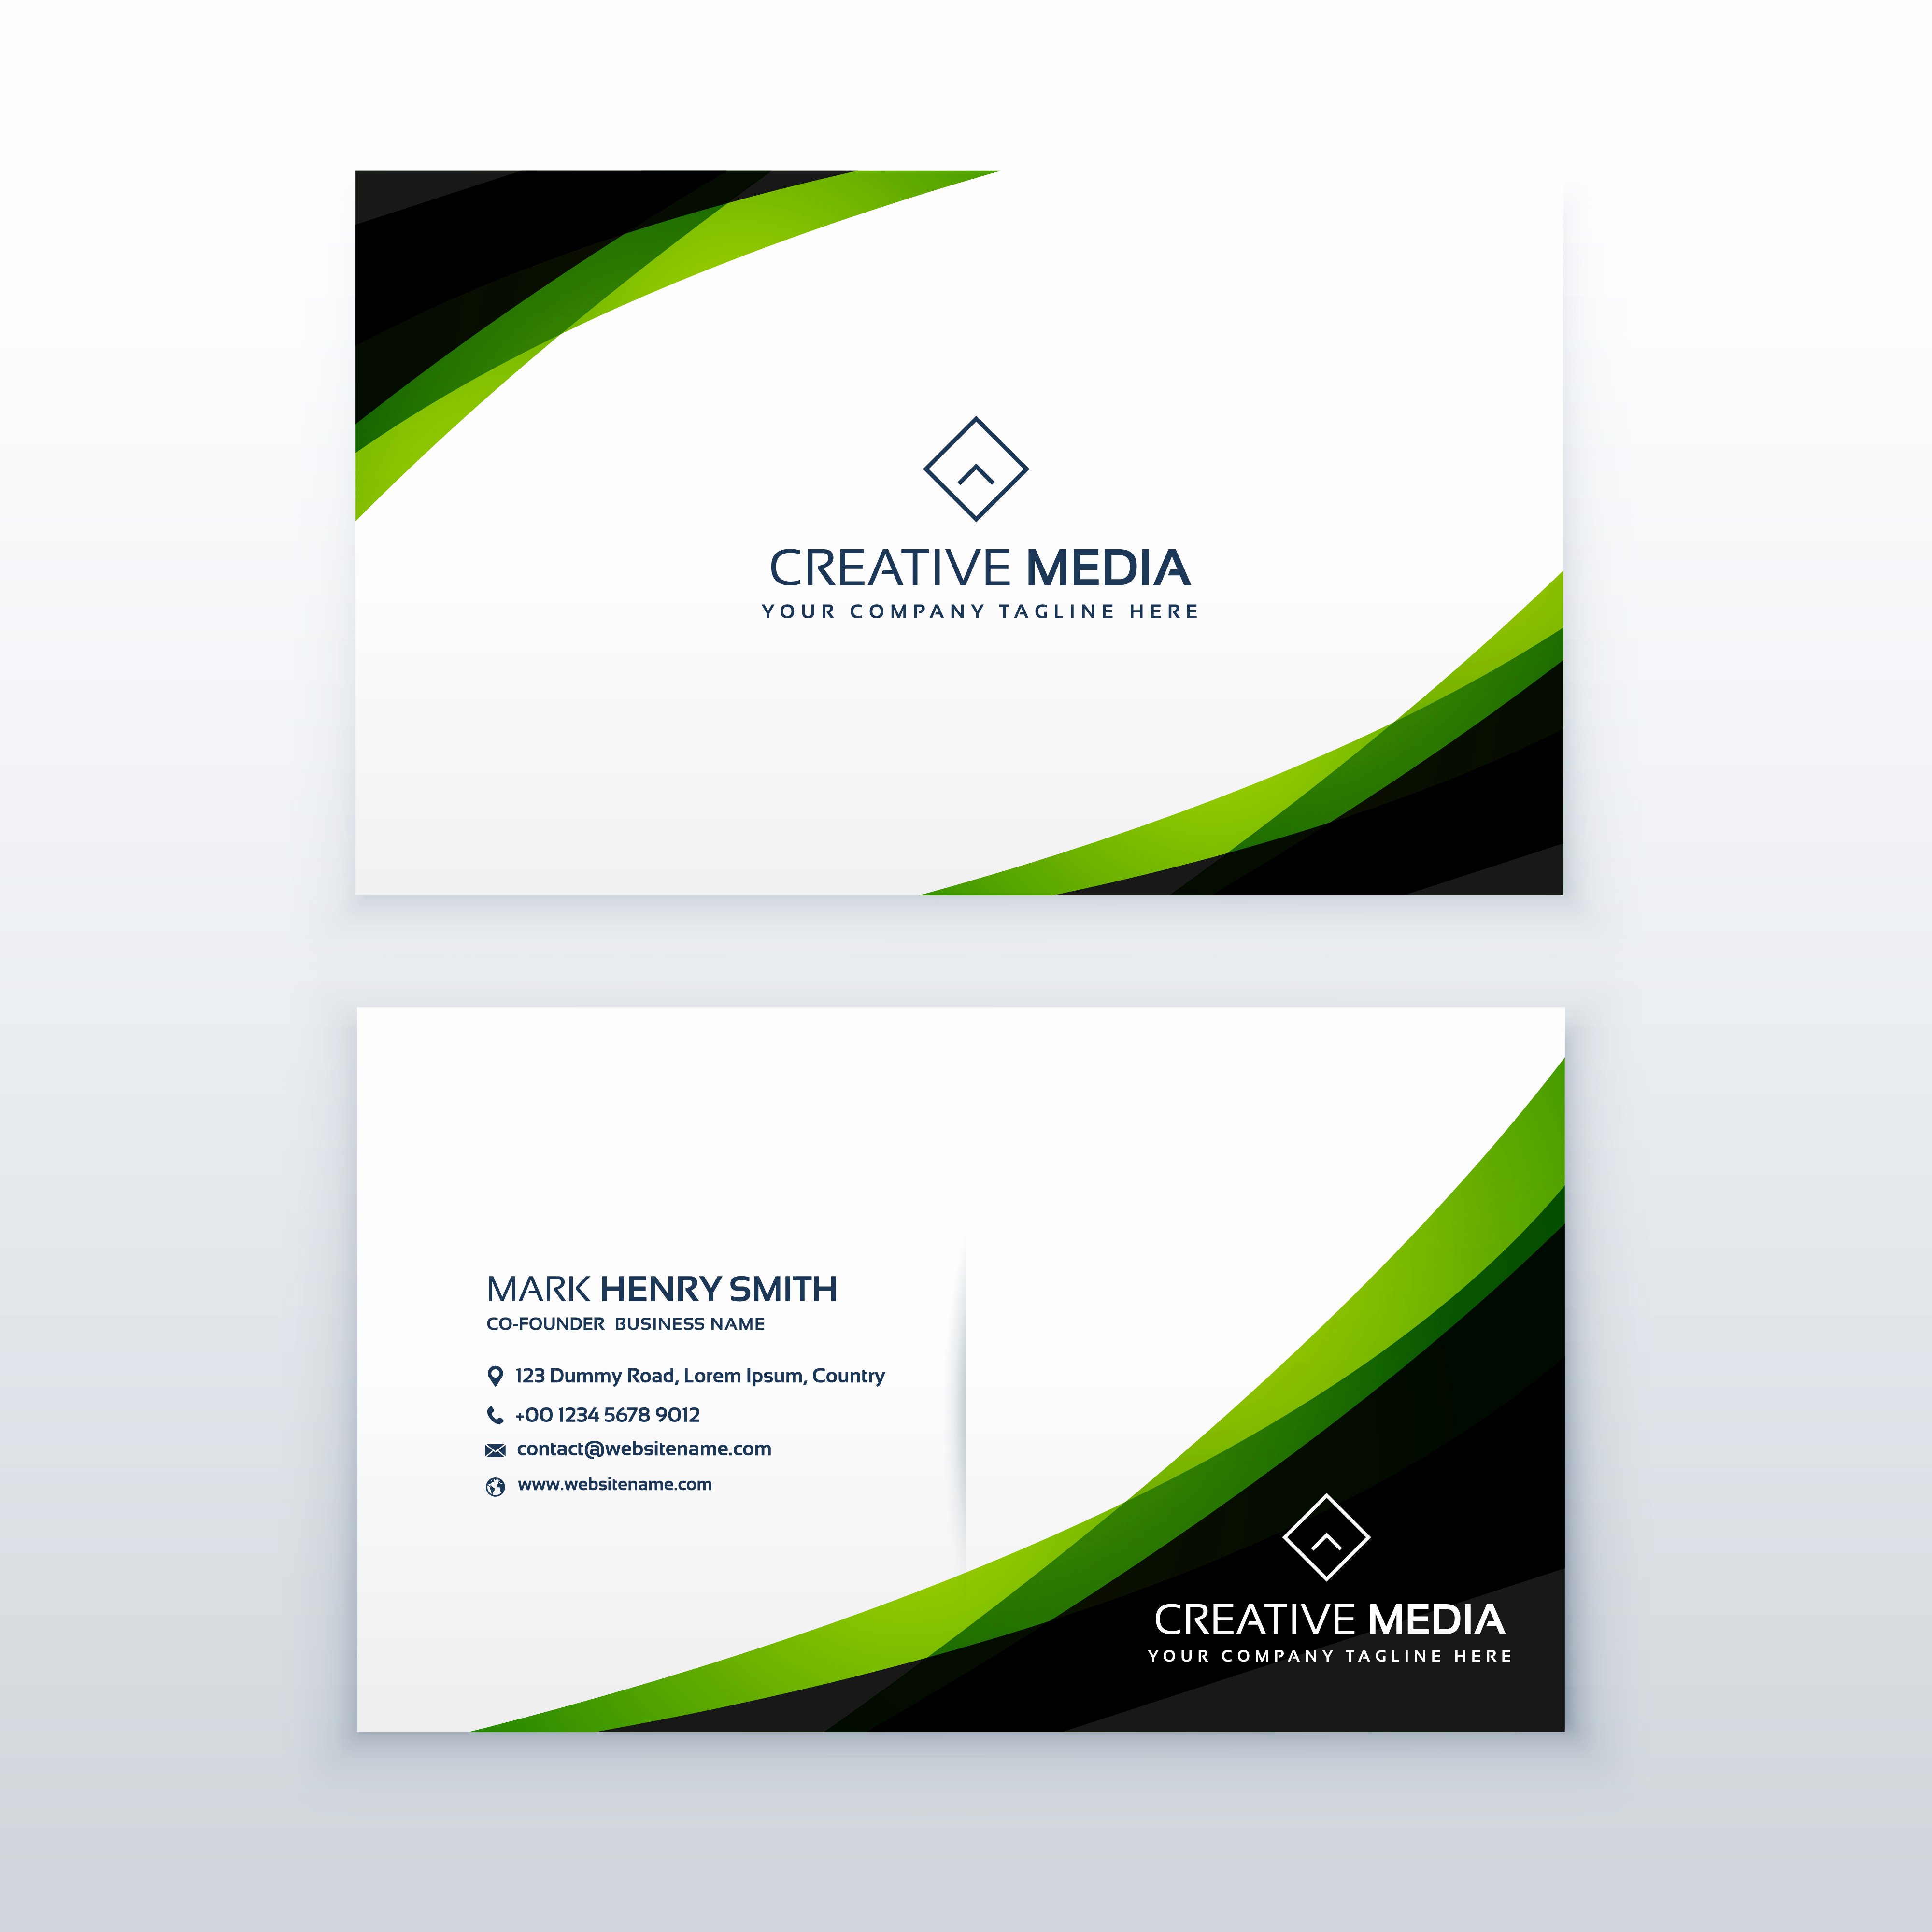 Business Postcard Template Free Fresh Clean Simple Green Business Card Design Template